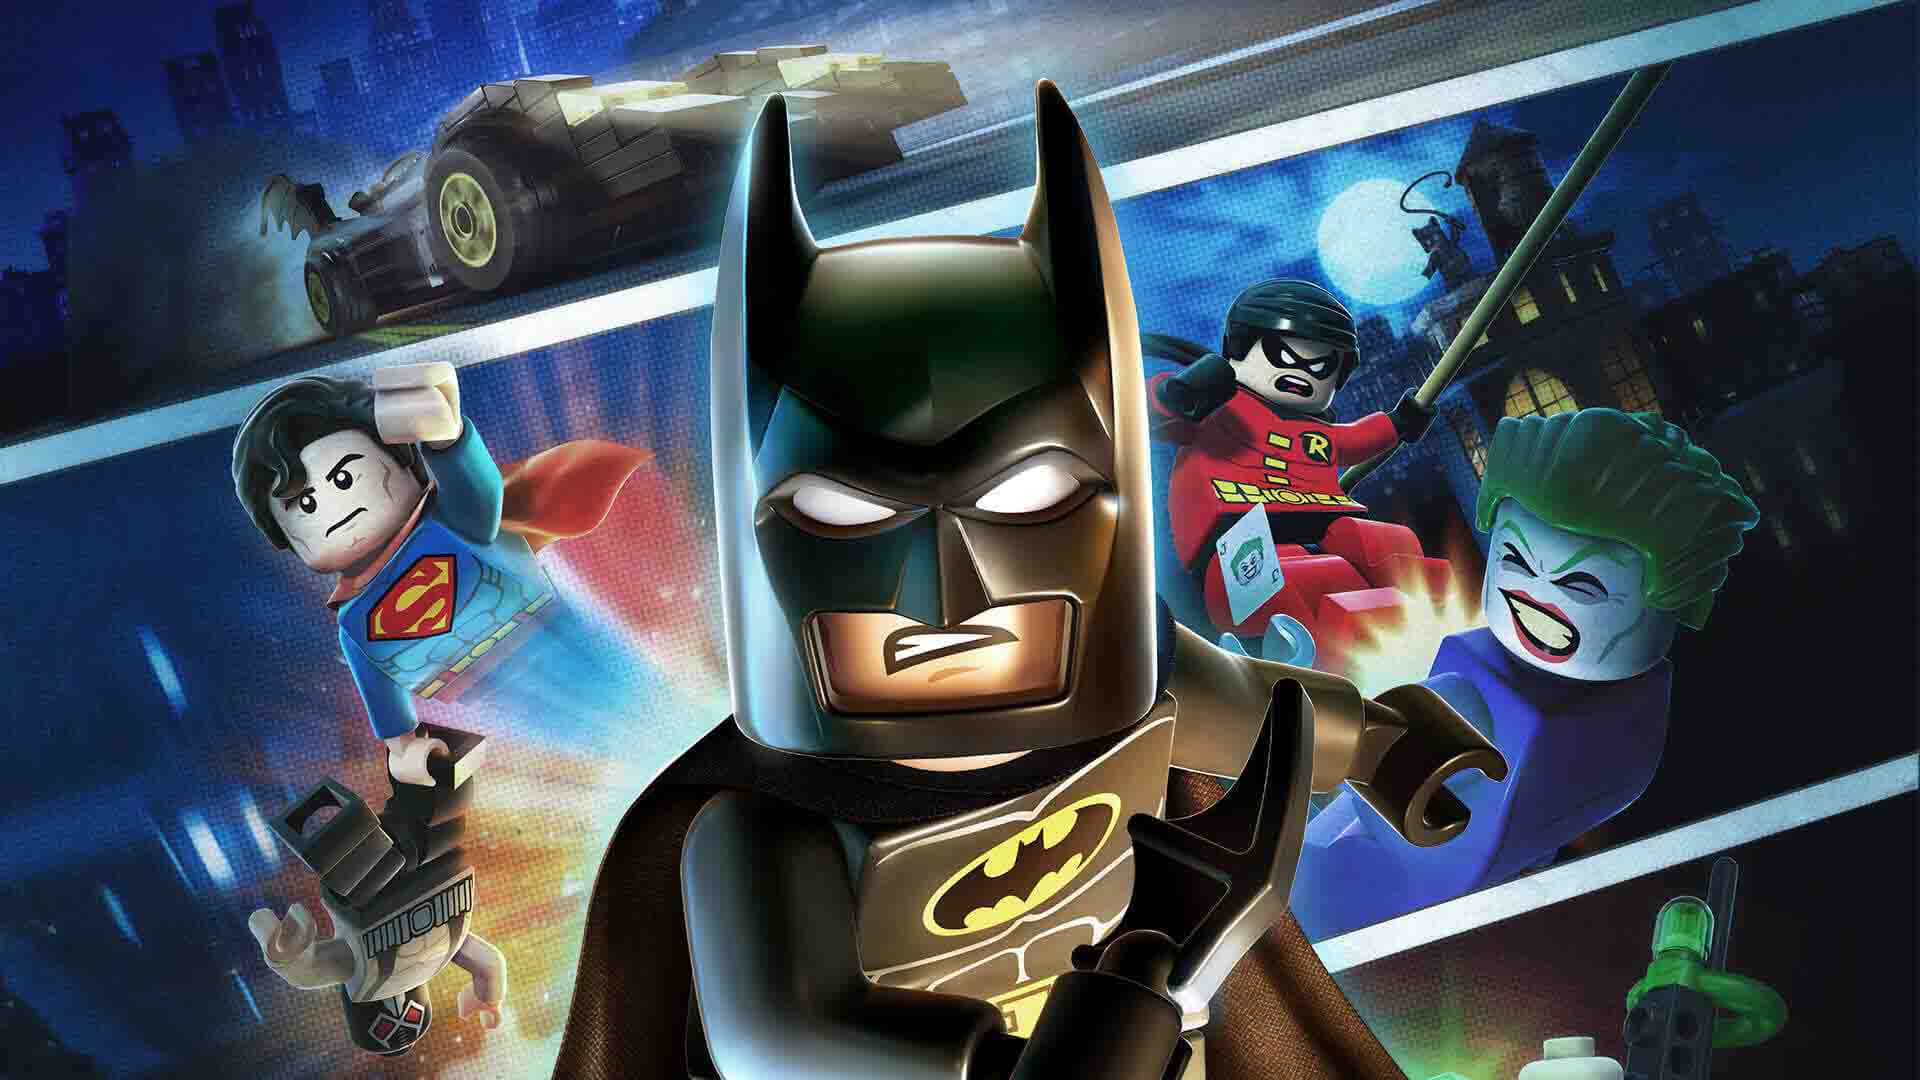 LEGO® Batman™ 2: DC Super Heroes System Requirements for PC Games minimum, recommended specifications for Windows, CPU, OS, RAM Memory, Storage, and GPU.